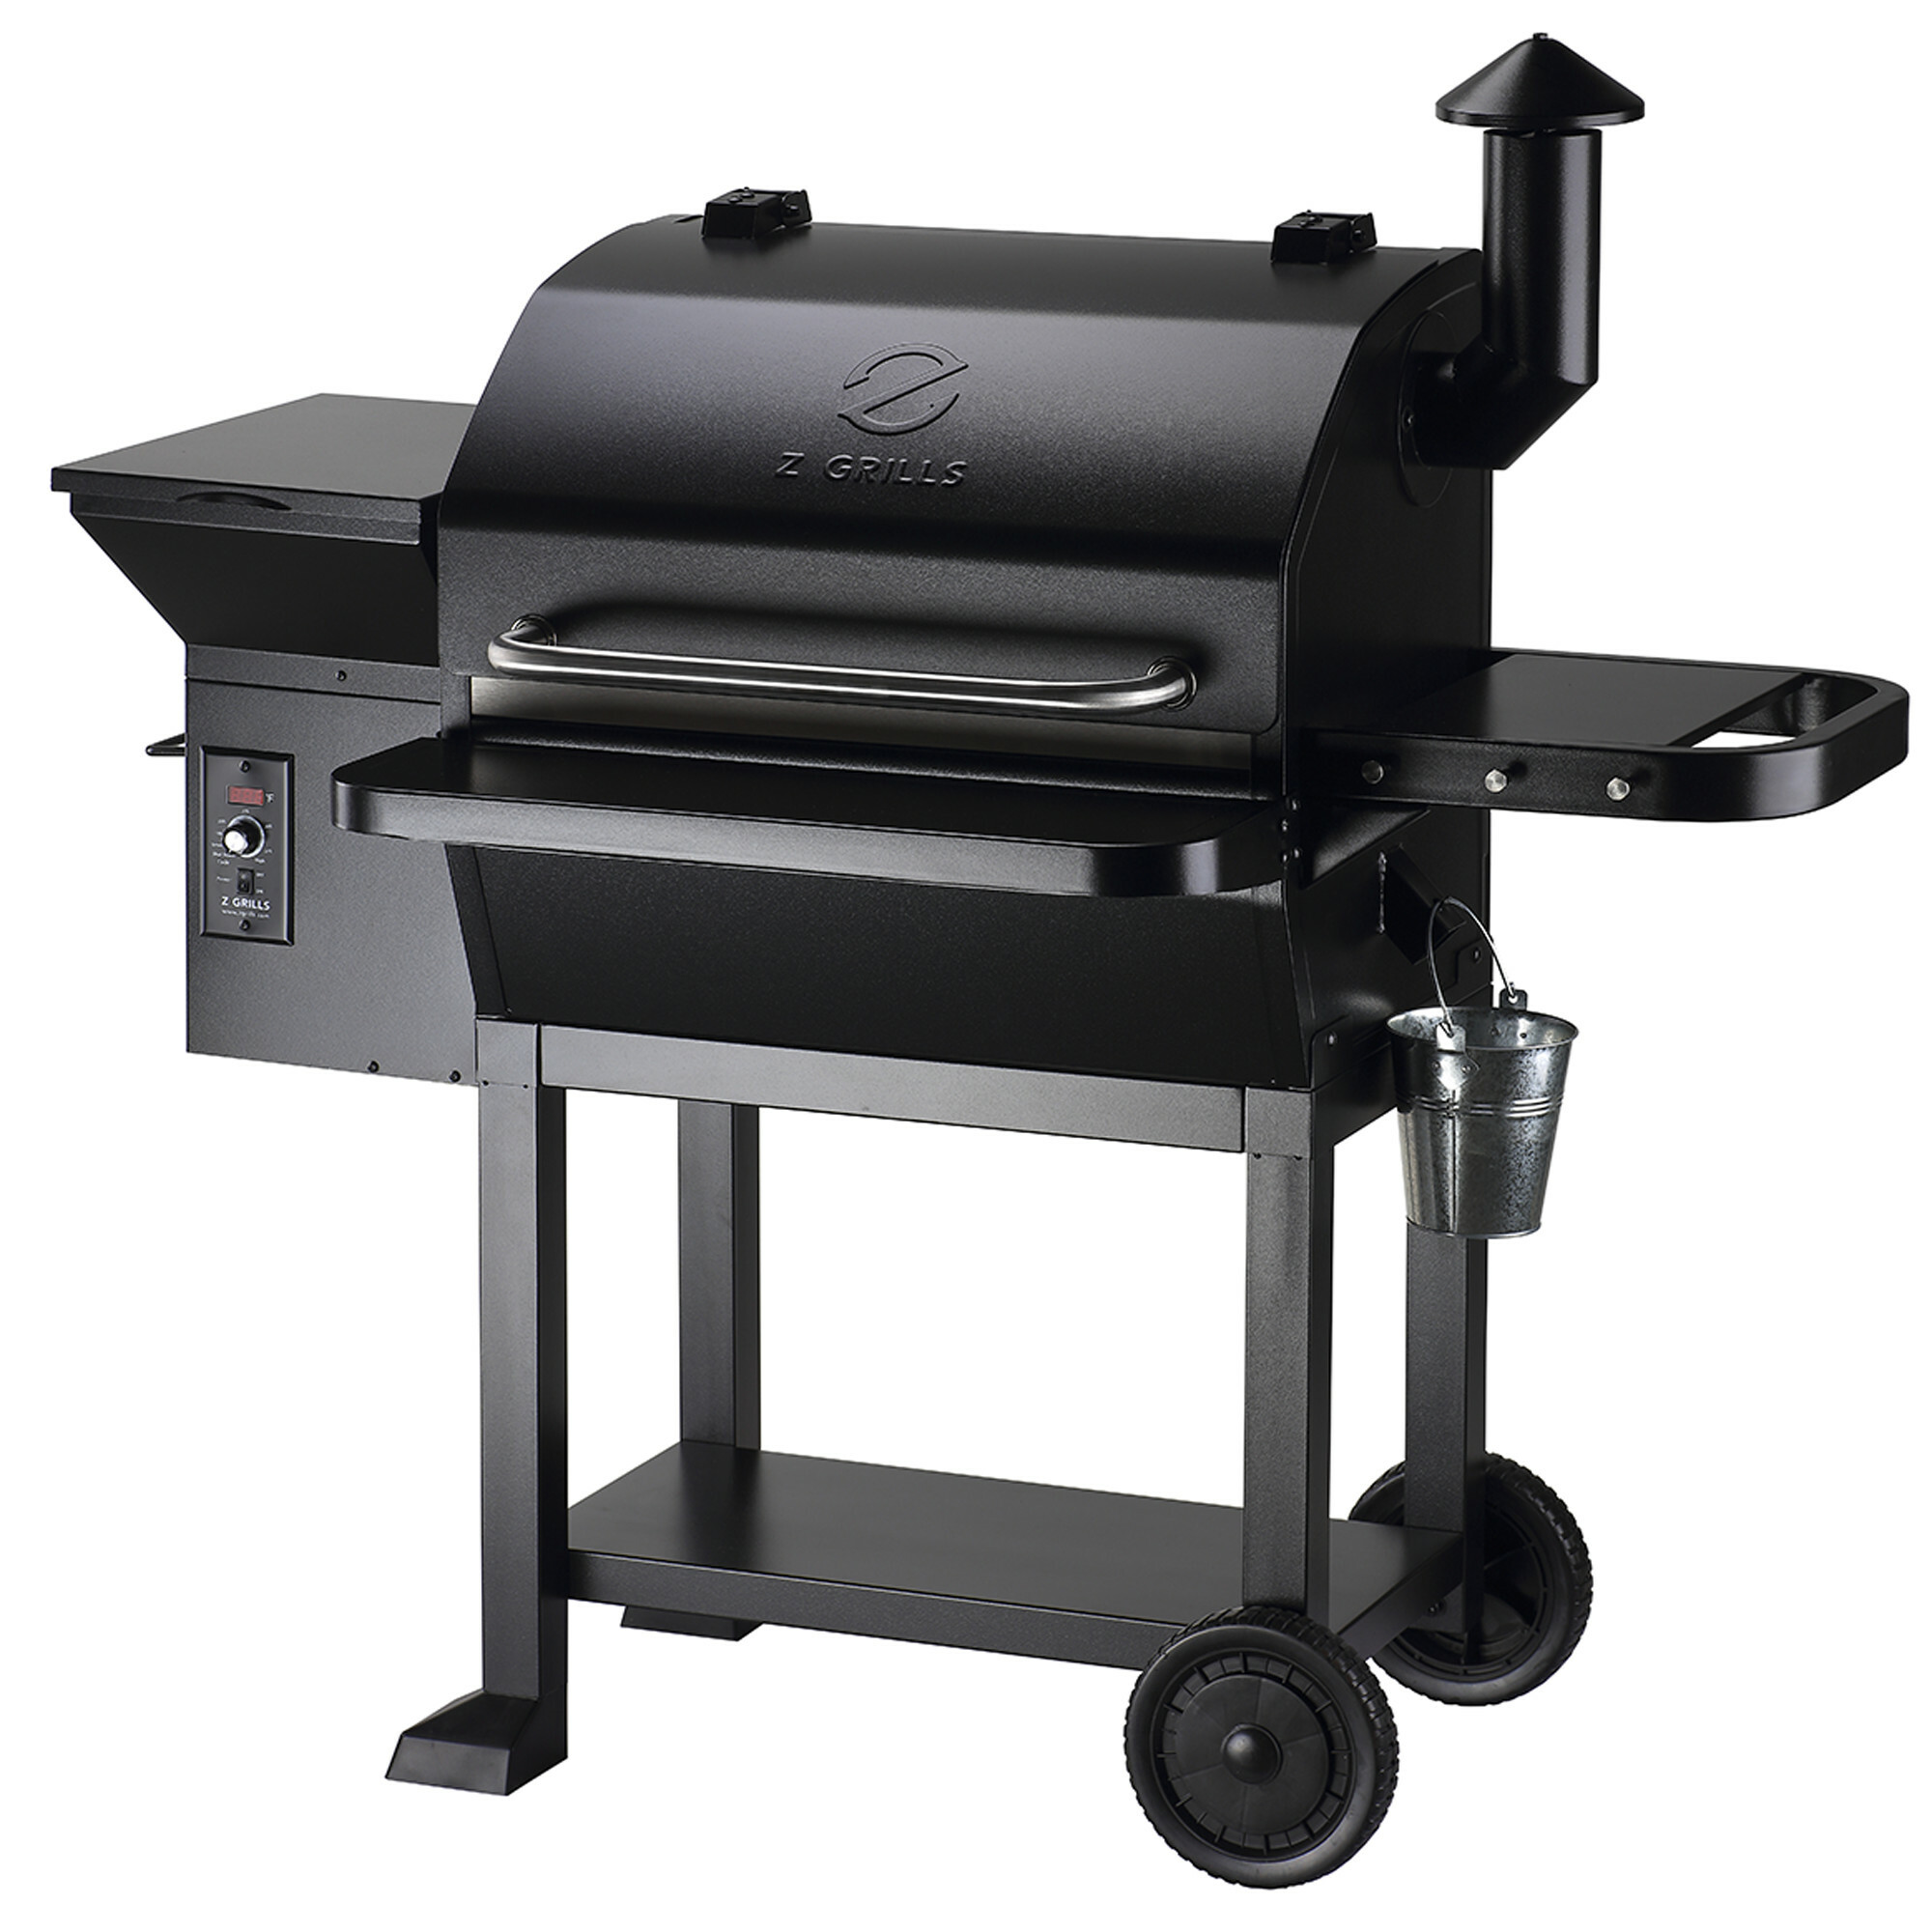 Z GRILLS ZPG-10002B 1060 sq. in. Wood Pellet Grill and Smoker 8-in-1 BBQ Black - image 2 of 12